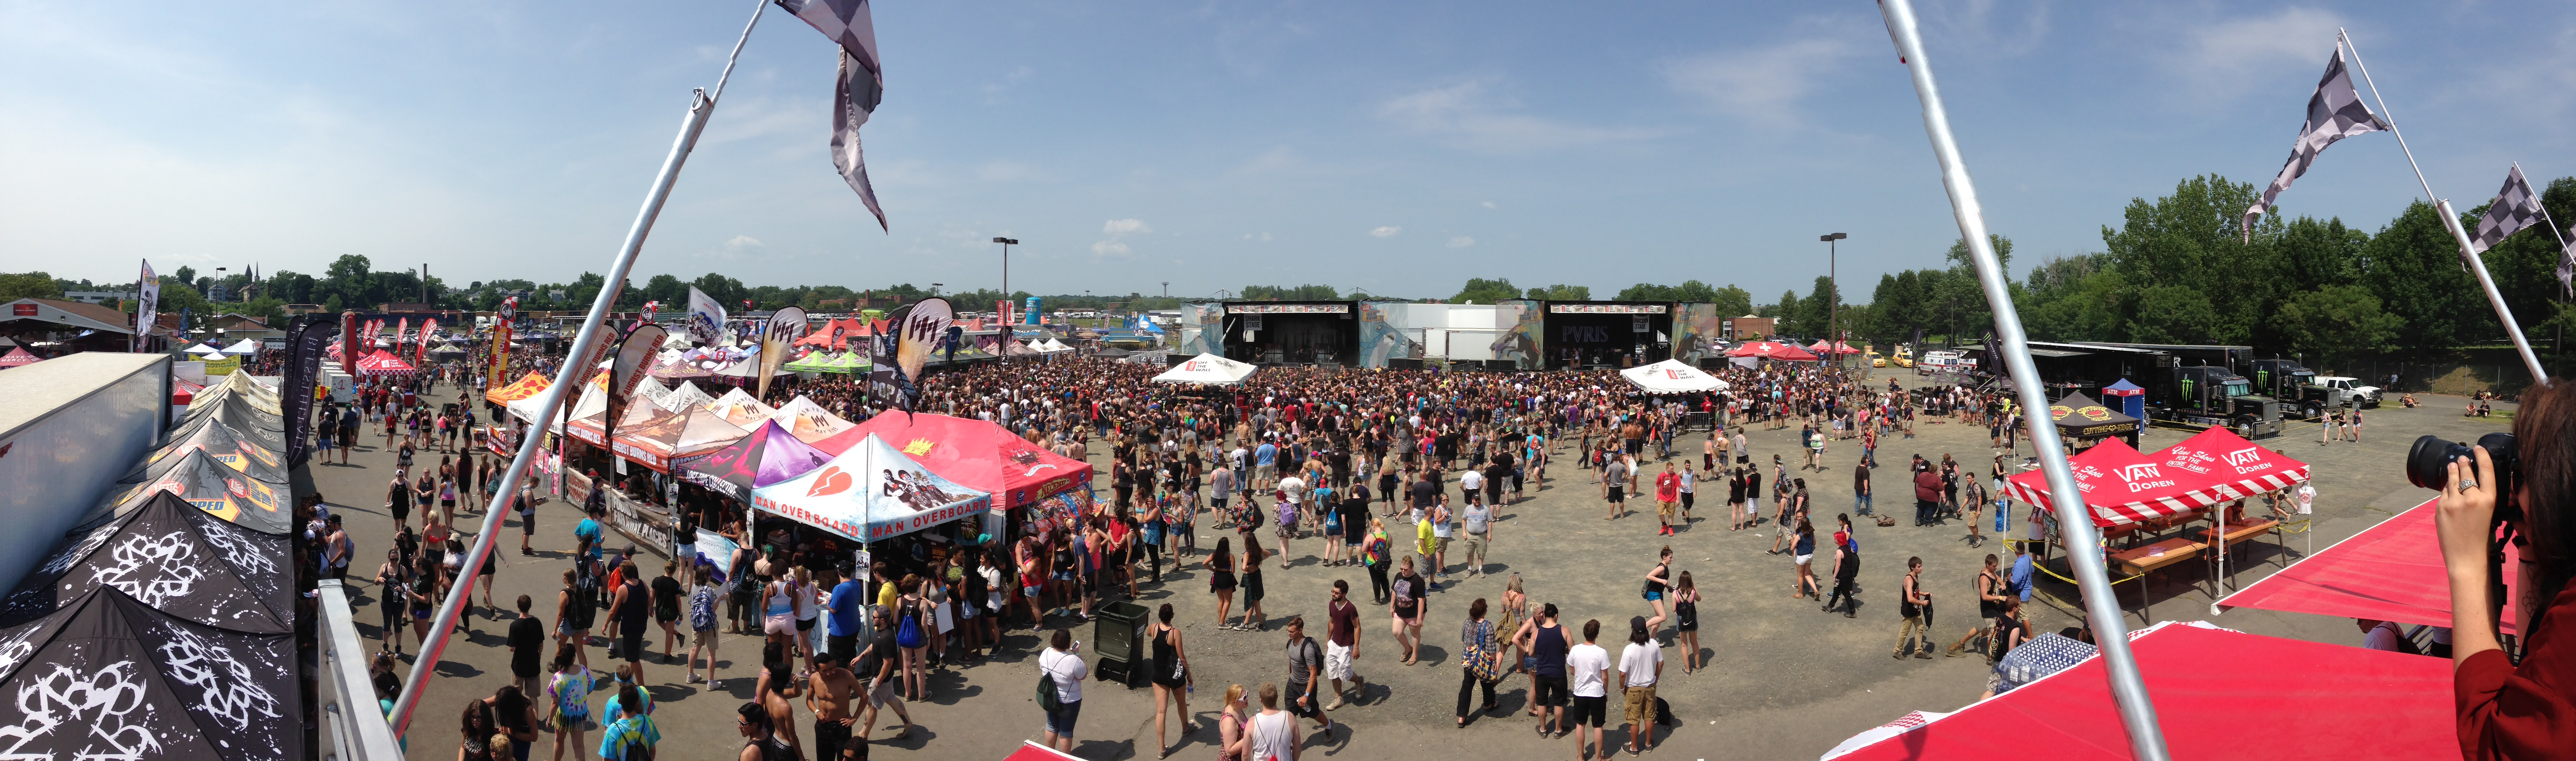 Overhead crowd photo by Miceli productions at the VANS Warped Tour 2015 in CT.